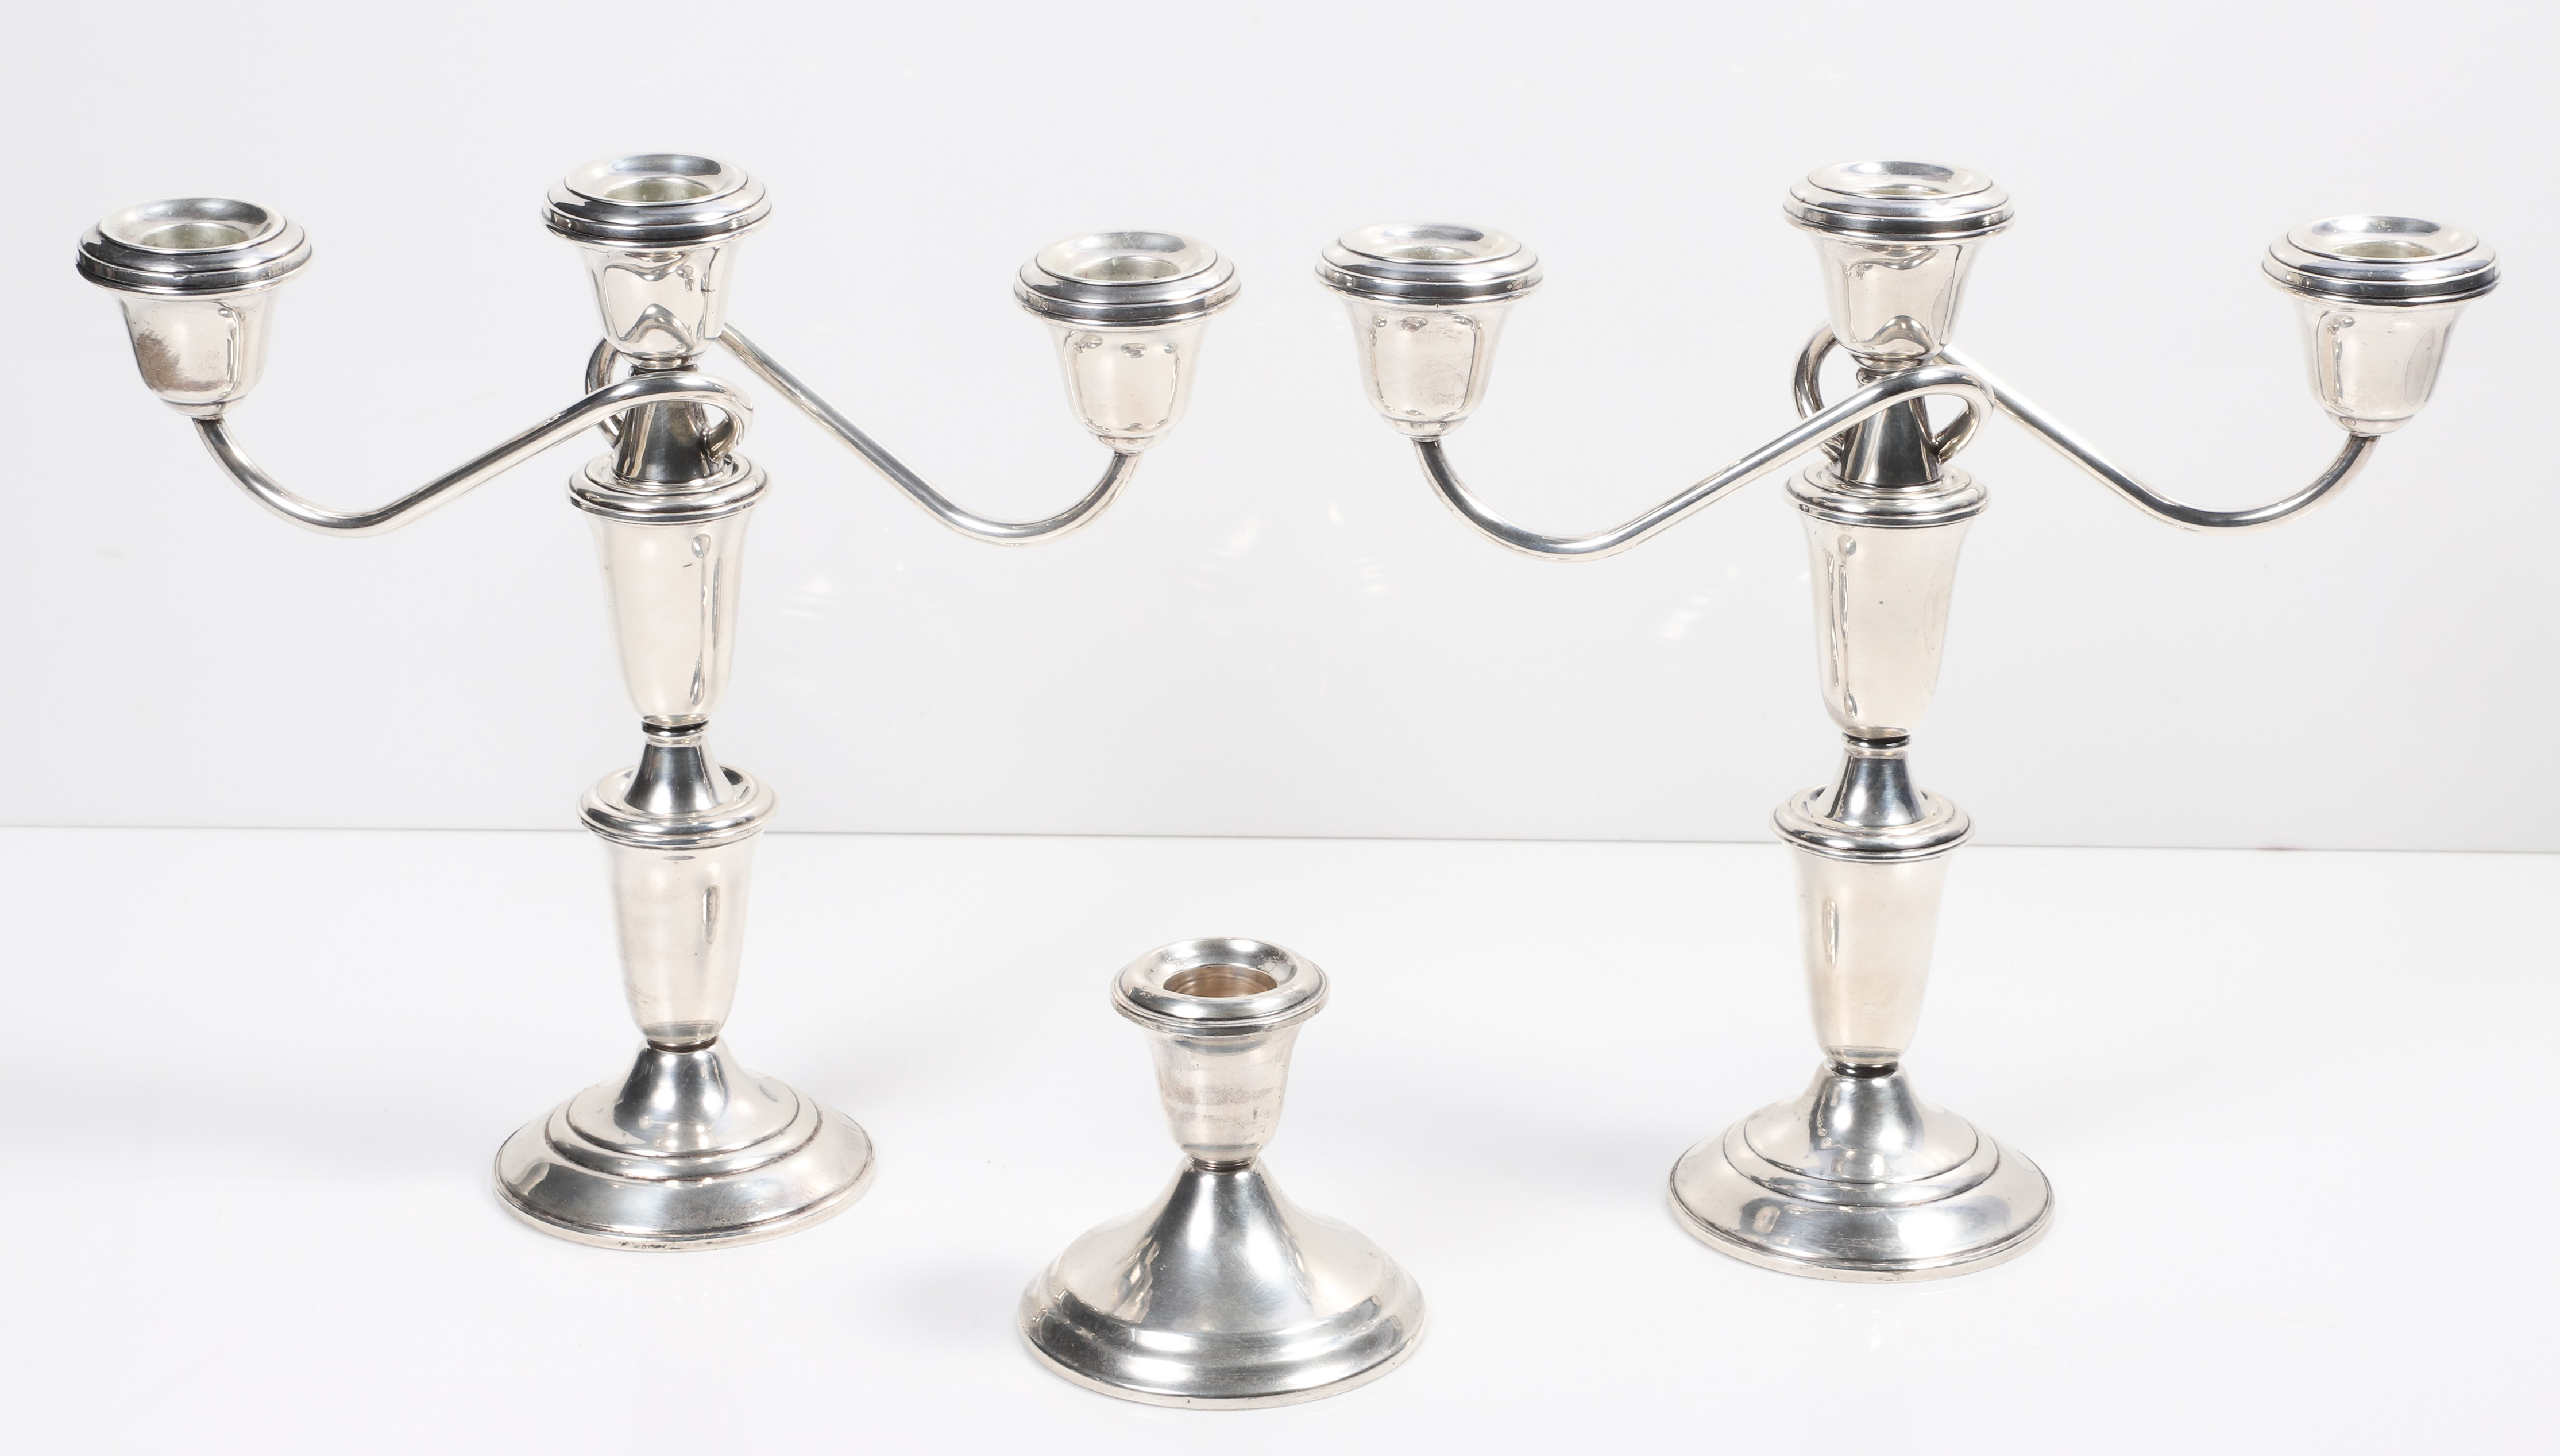  3 Weighted sterling silver candlesticks  2e18f5